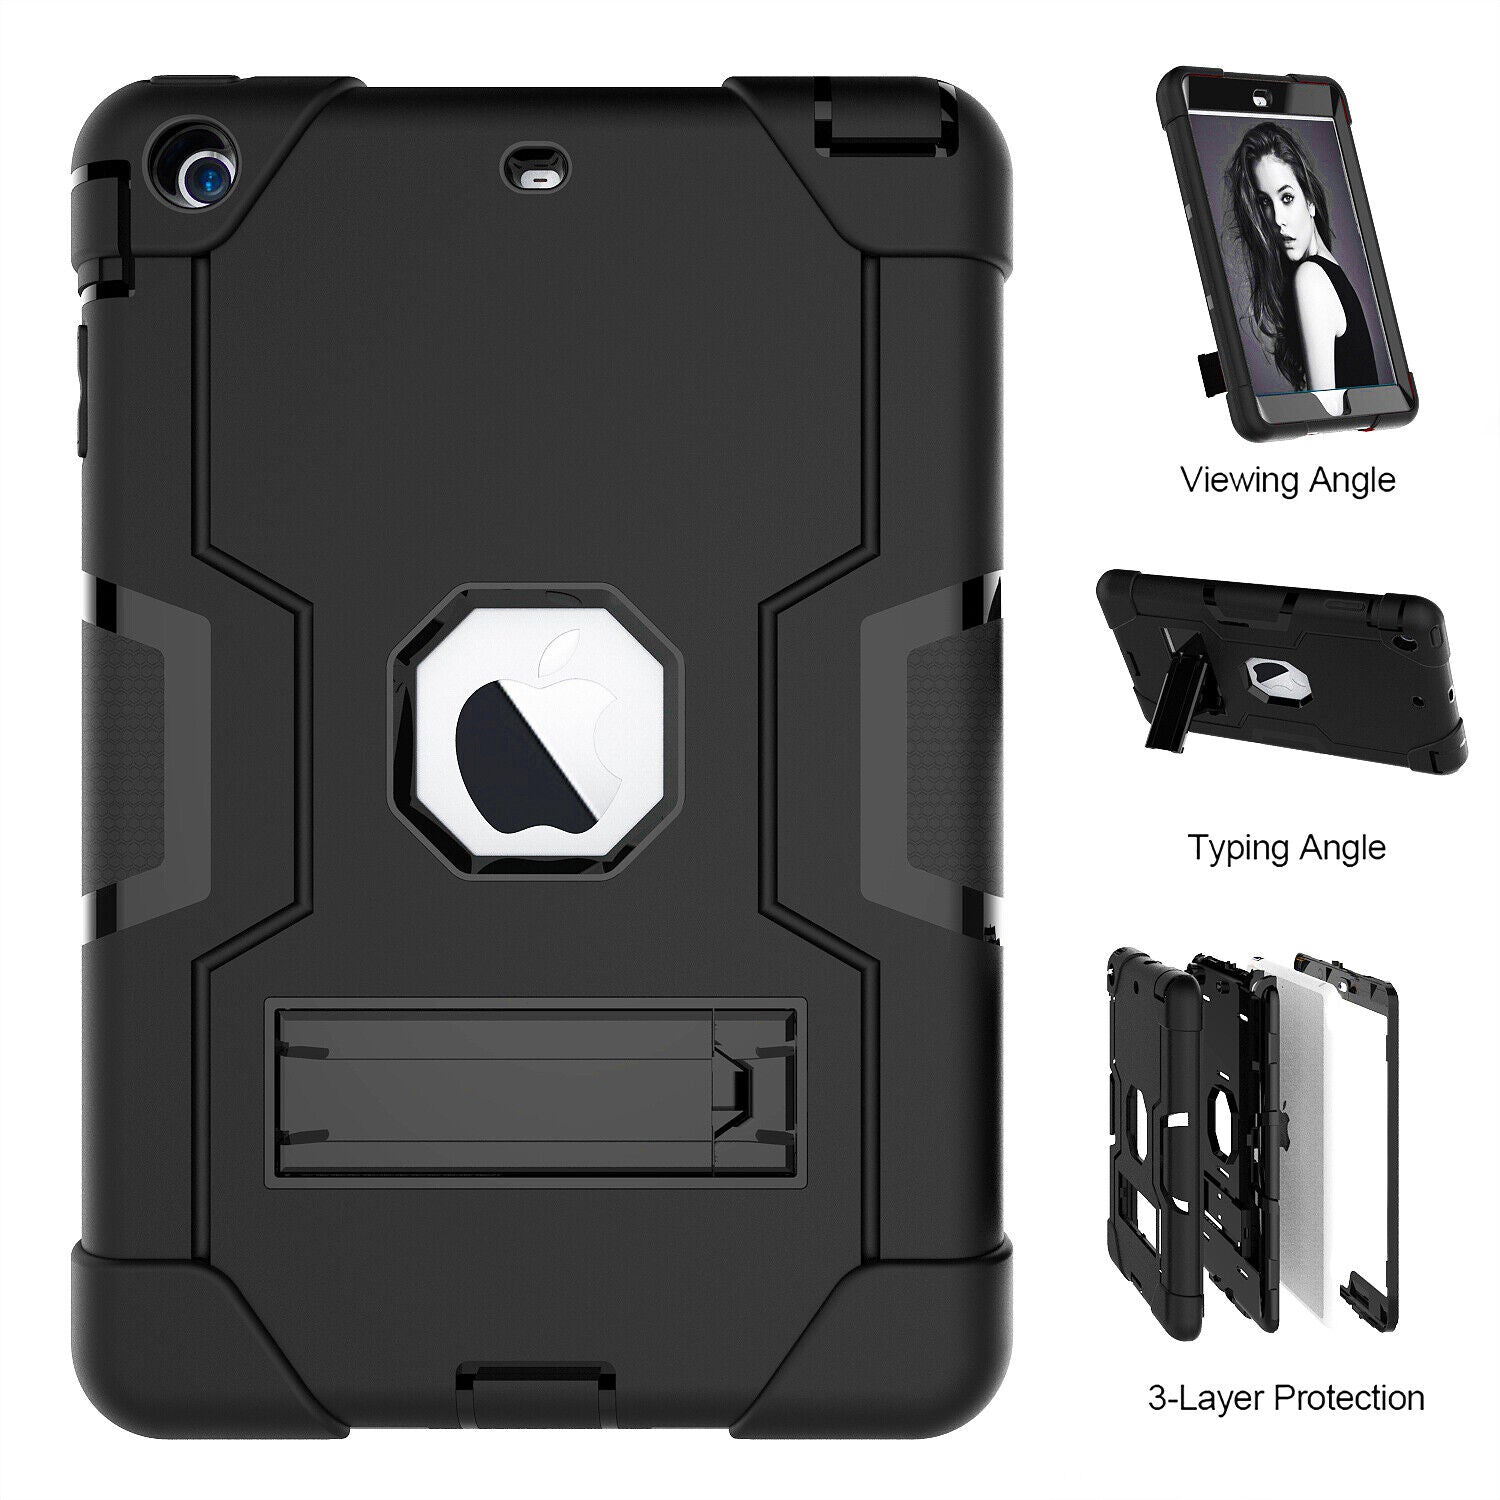 Apple iPad 7, 8 and 9 (10.2 inch) & iPad Air 3 (10.5) Black Shockproof Rugged Case with Kickstand *Free Shipping*